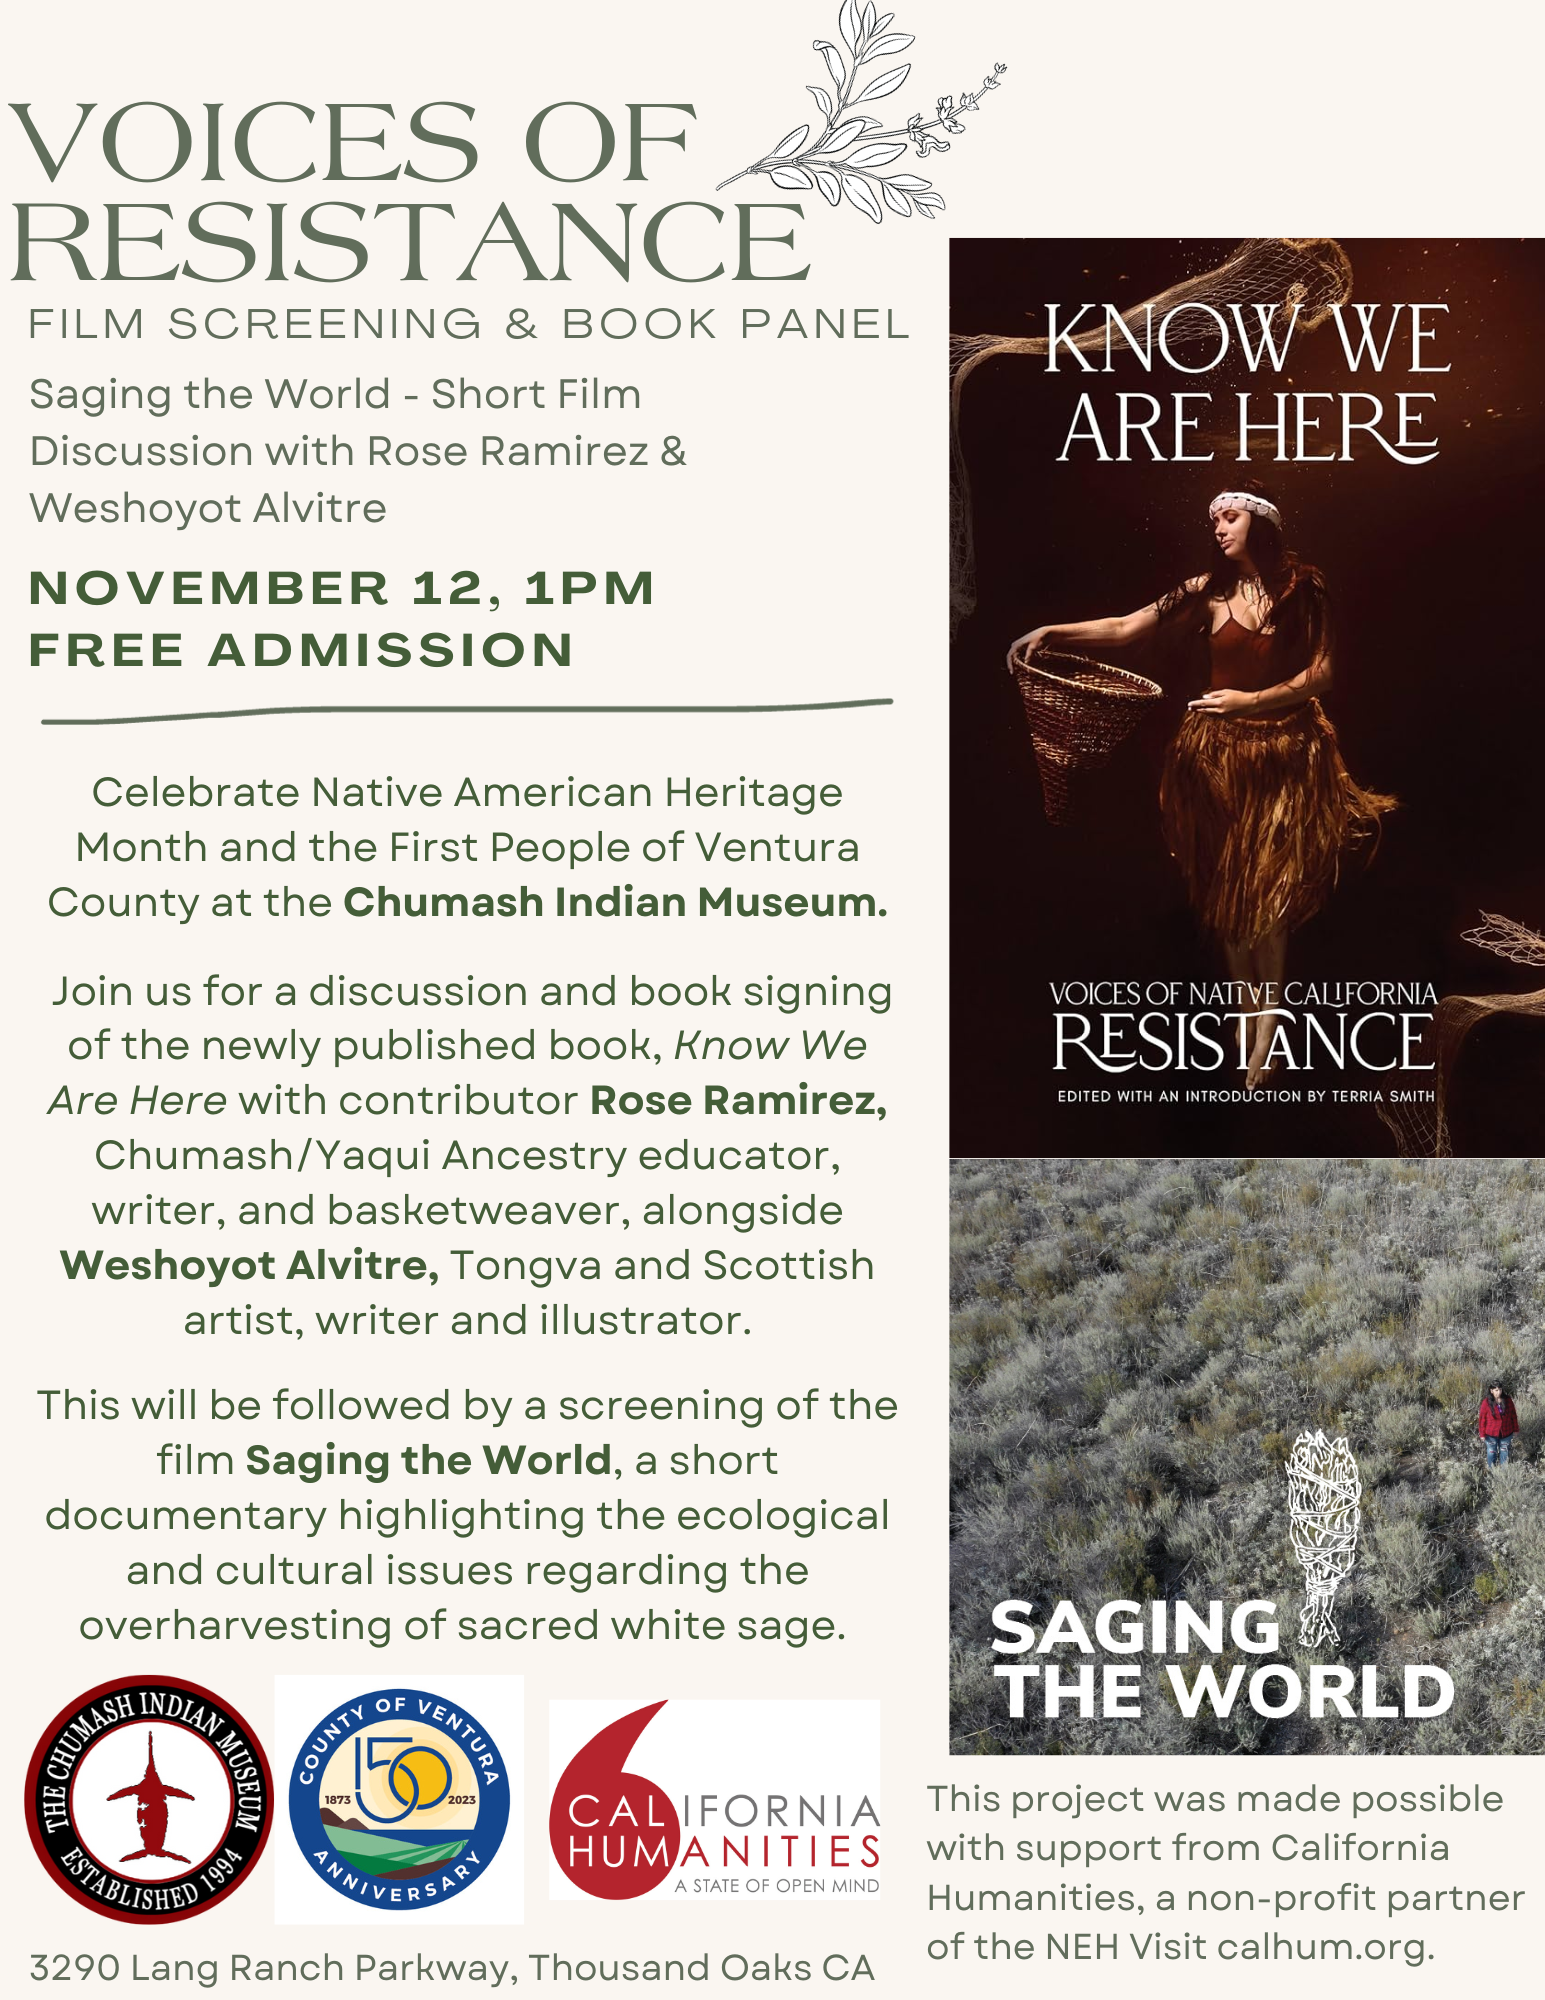 The Voices of Resistance book cover and Saging the world Film Graphic